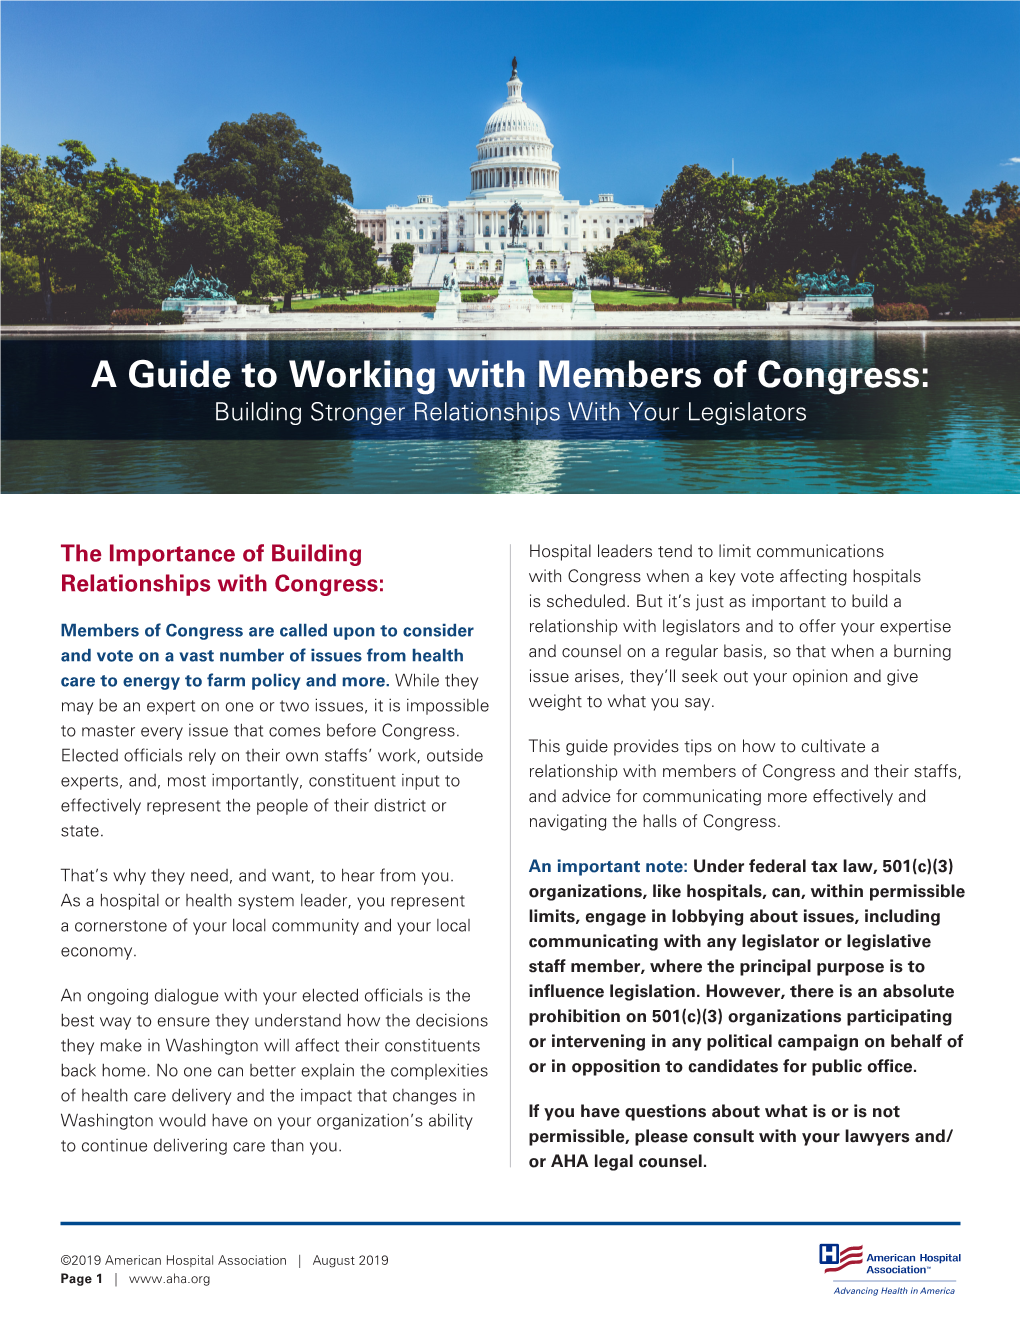 A Guide to Working with Members of Congress: Building Stronger Relationships with Your Legislators